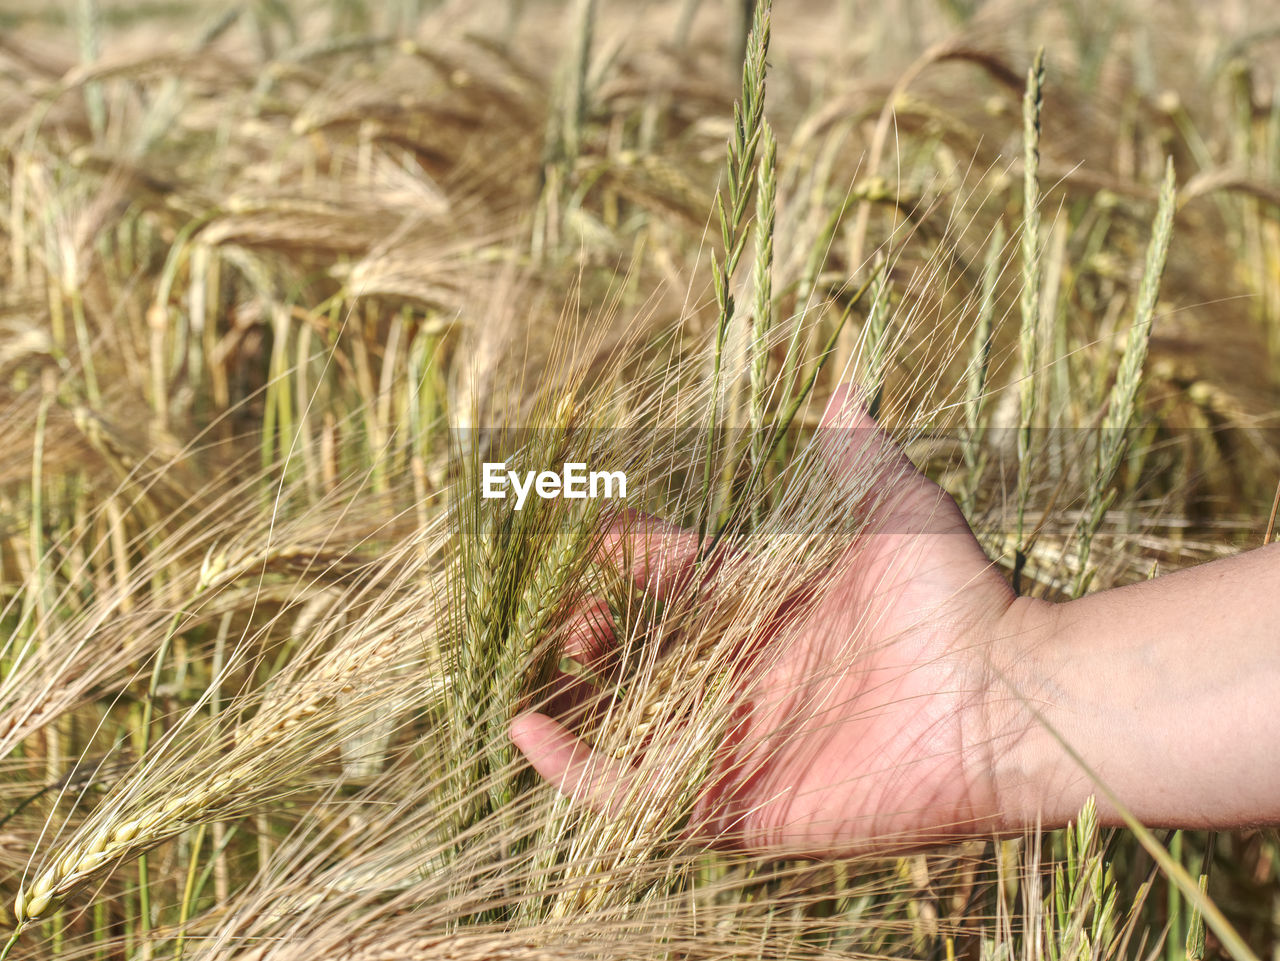 Female farmer hands gently touching ear of barley to observe progress and maturation of grains